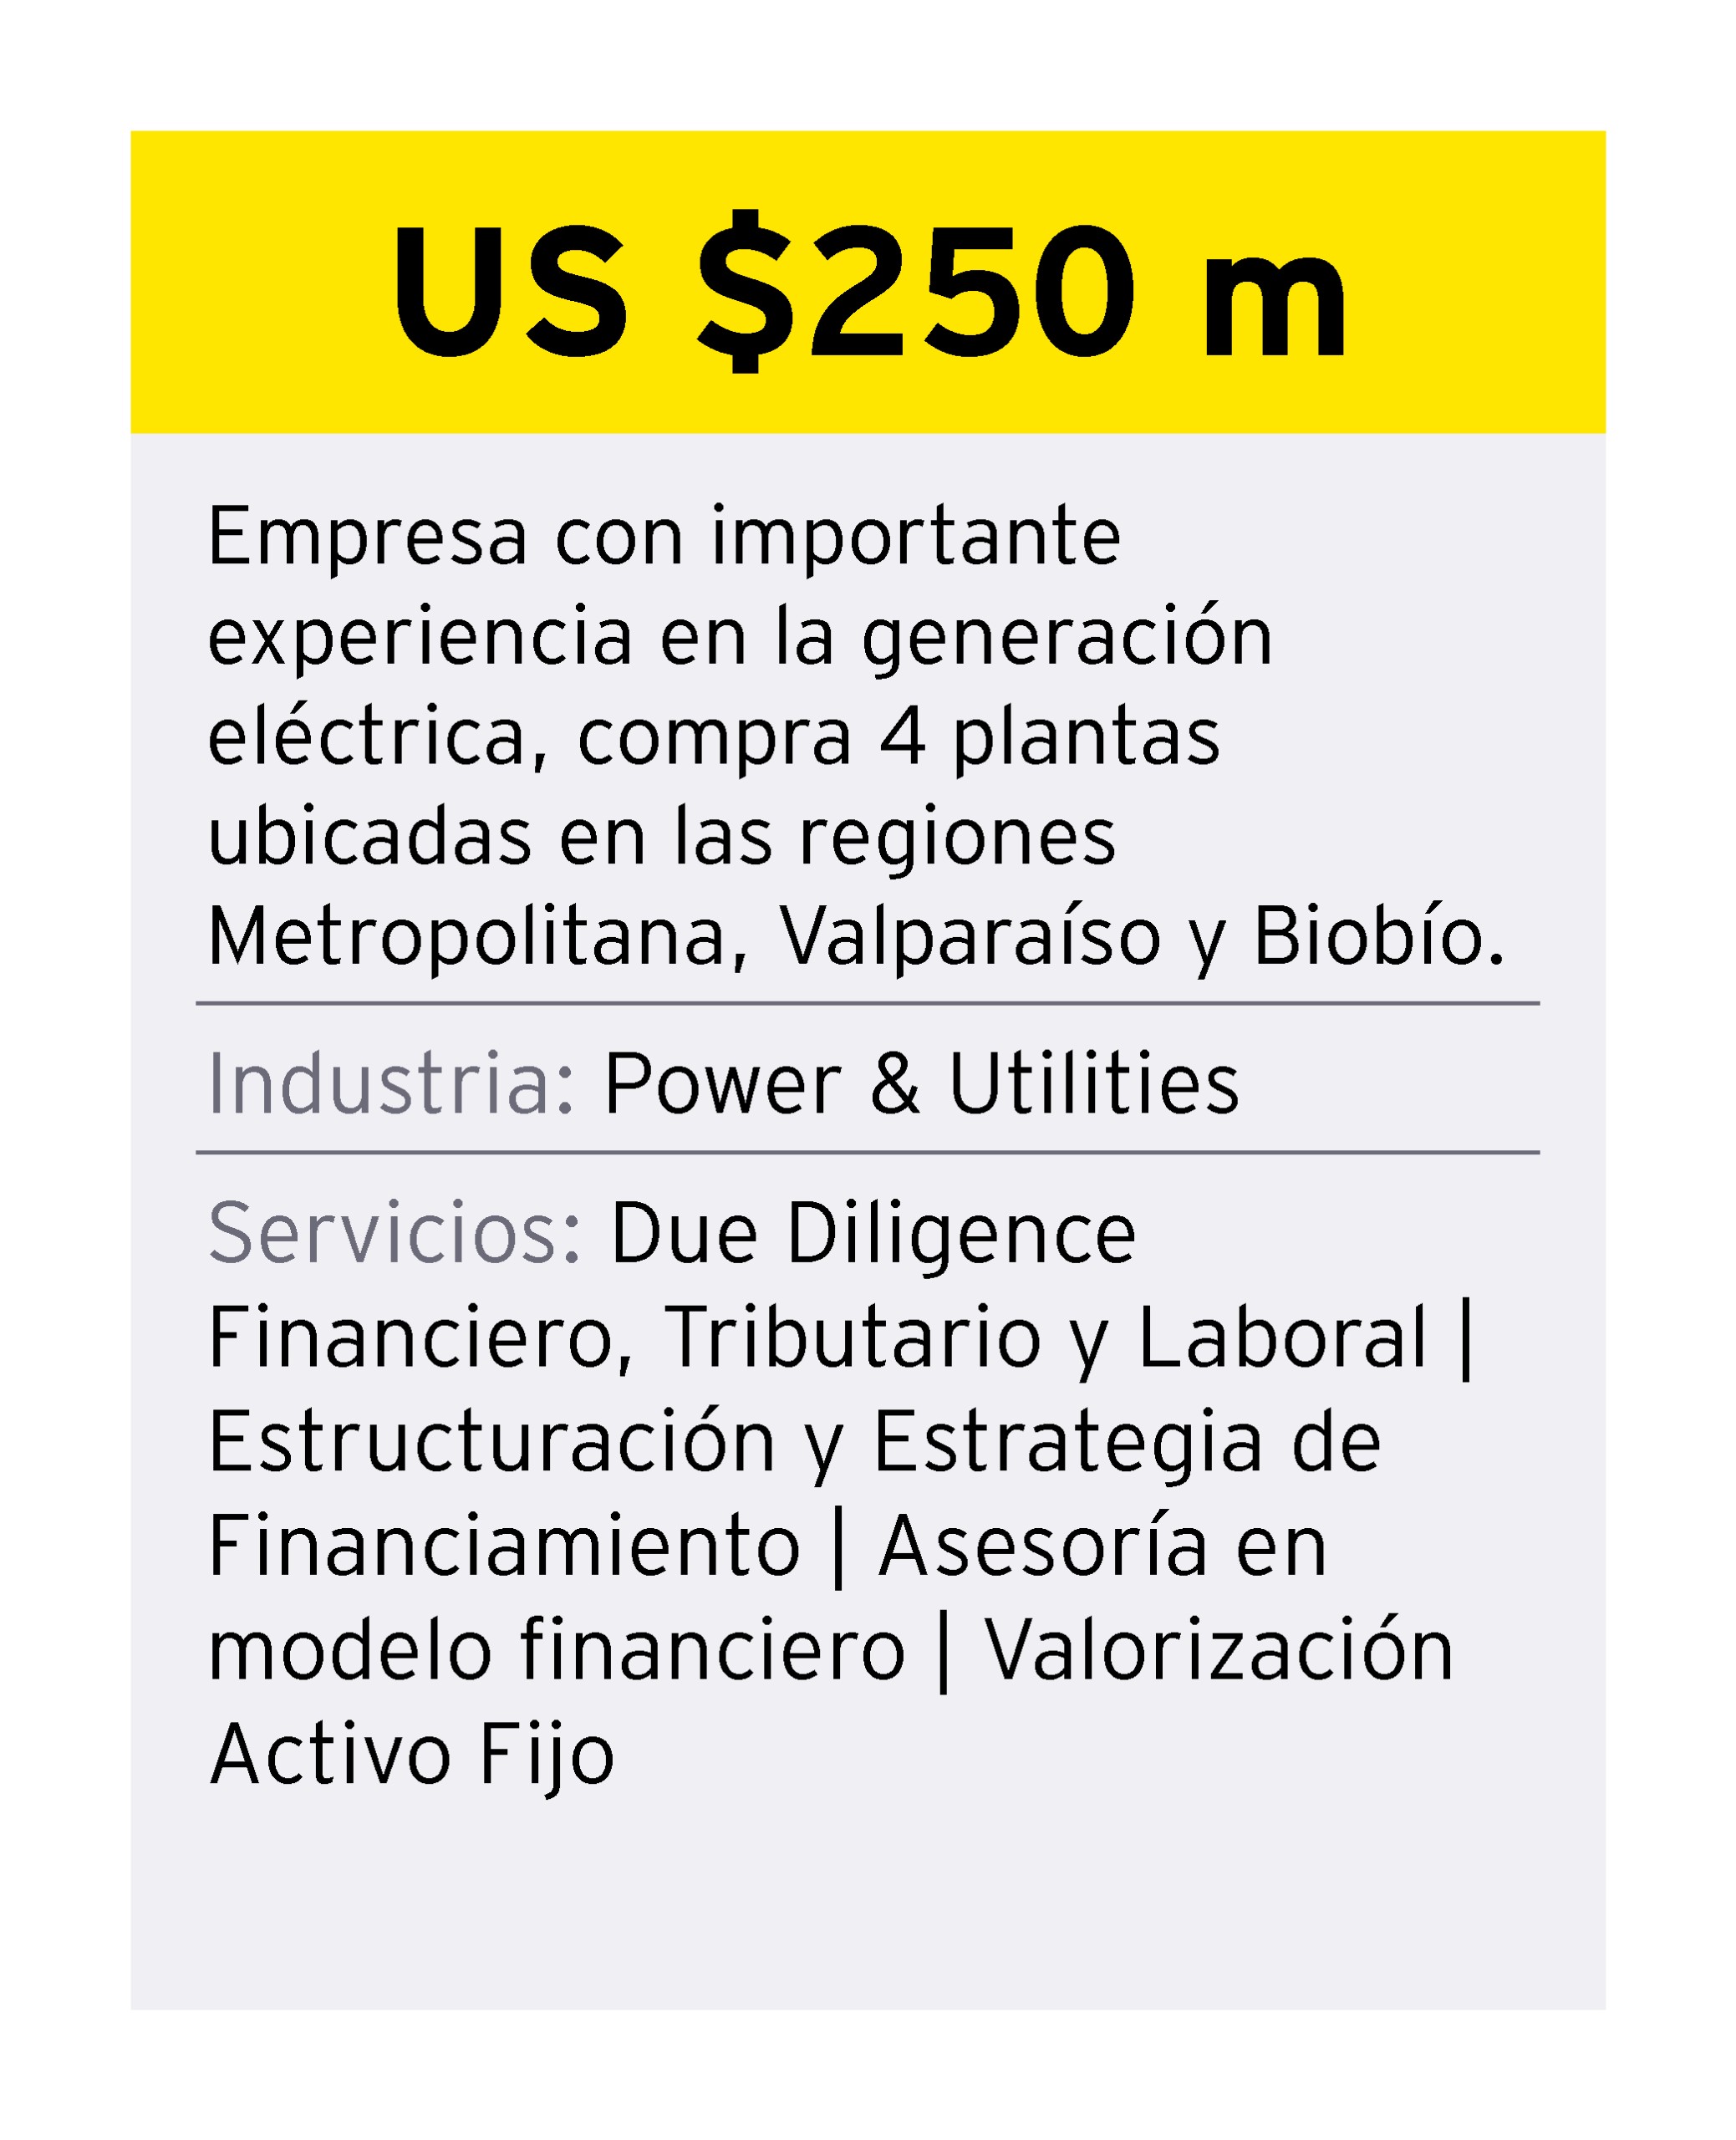 ey-chile-credencial-2-energy